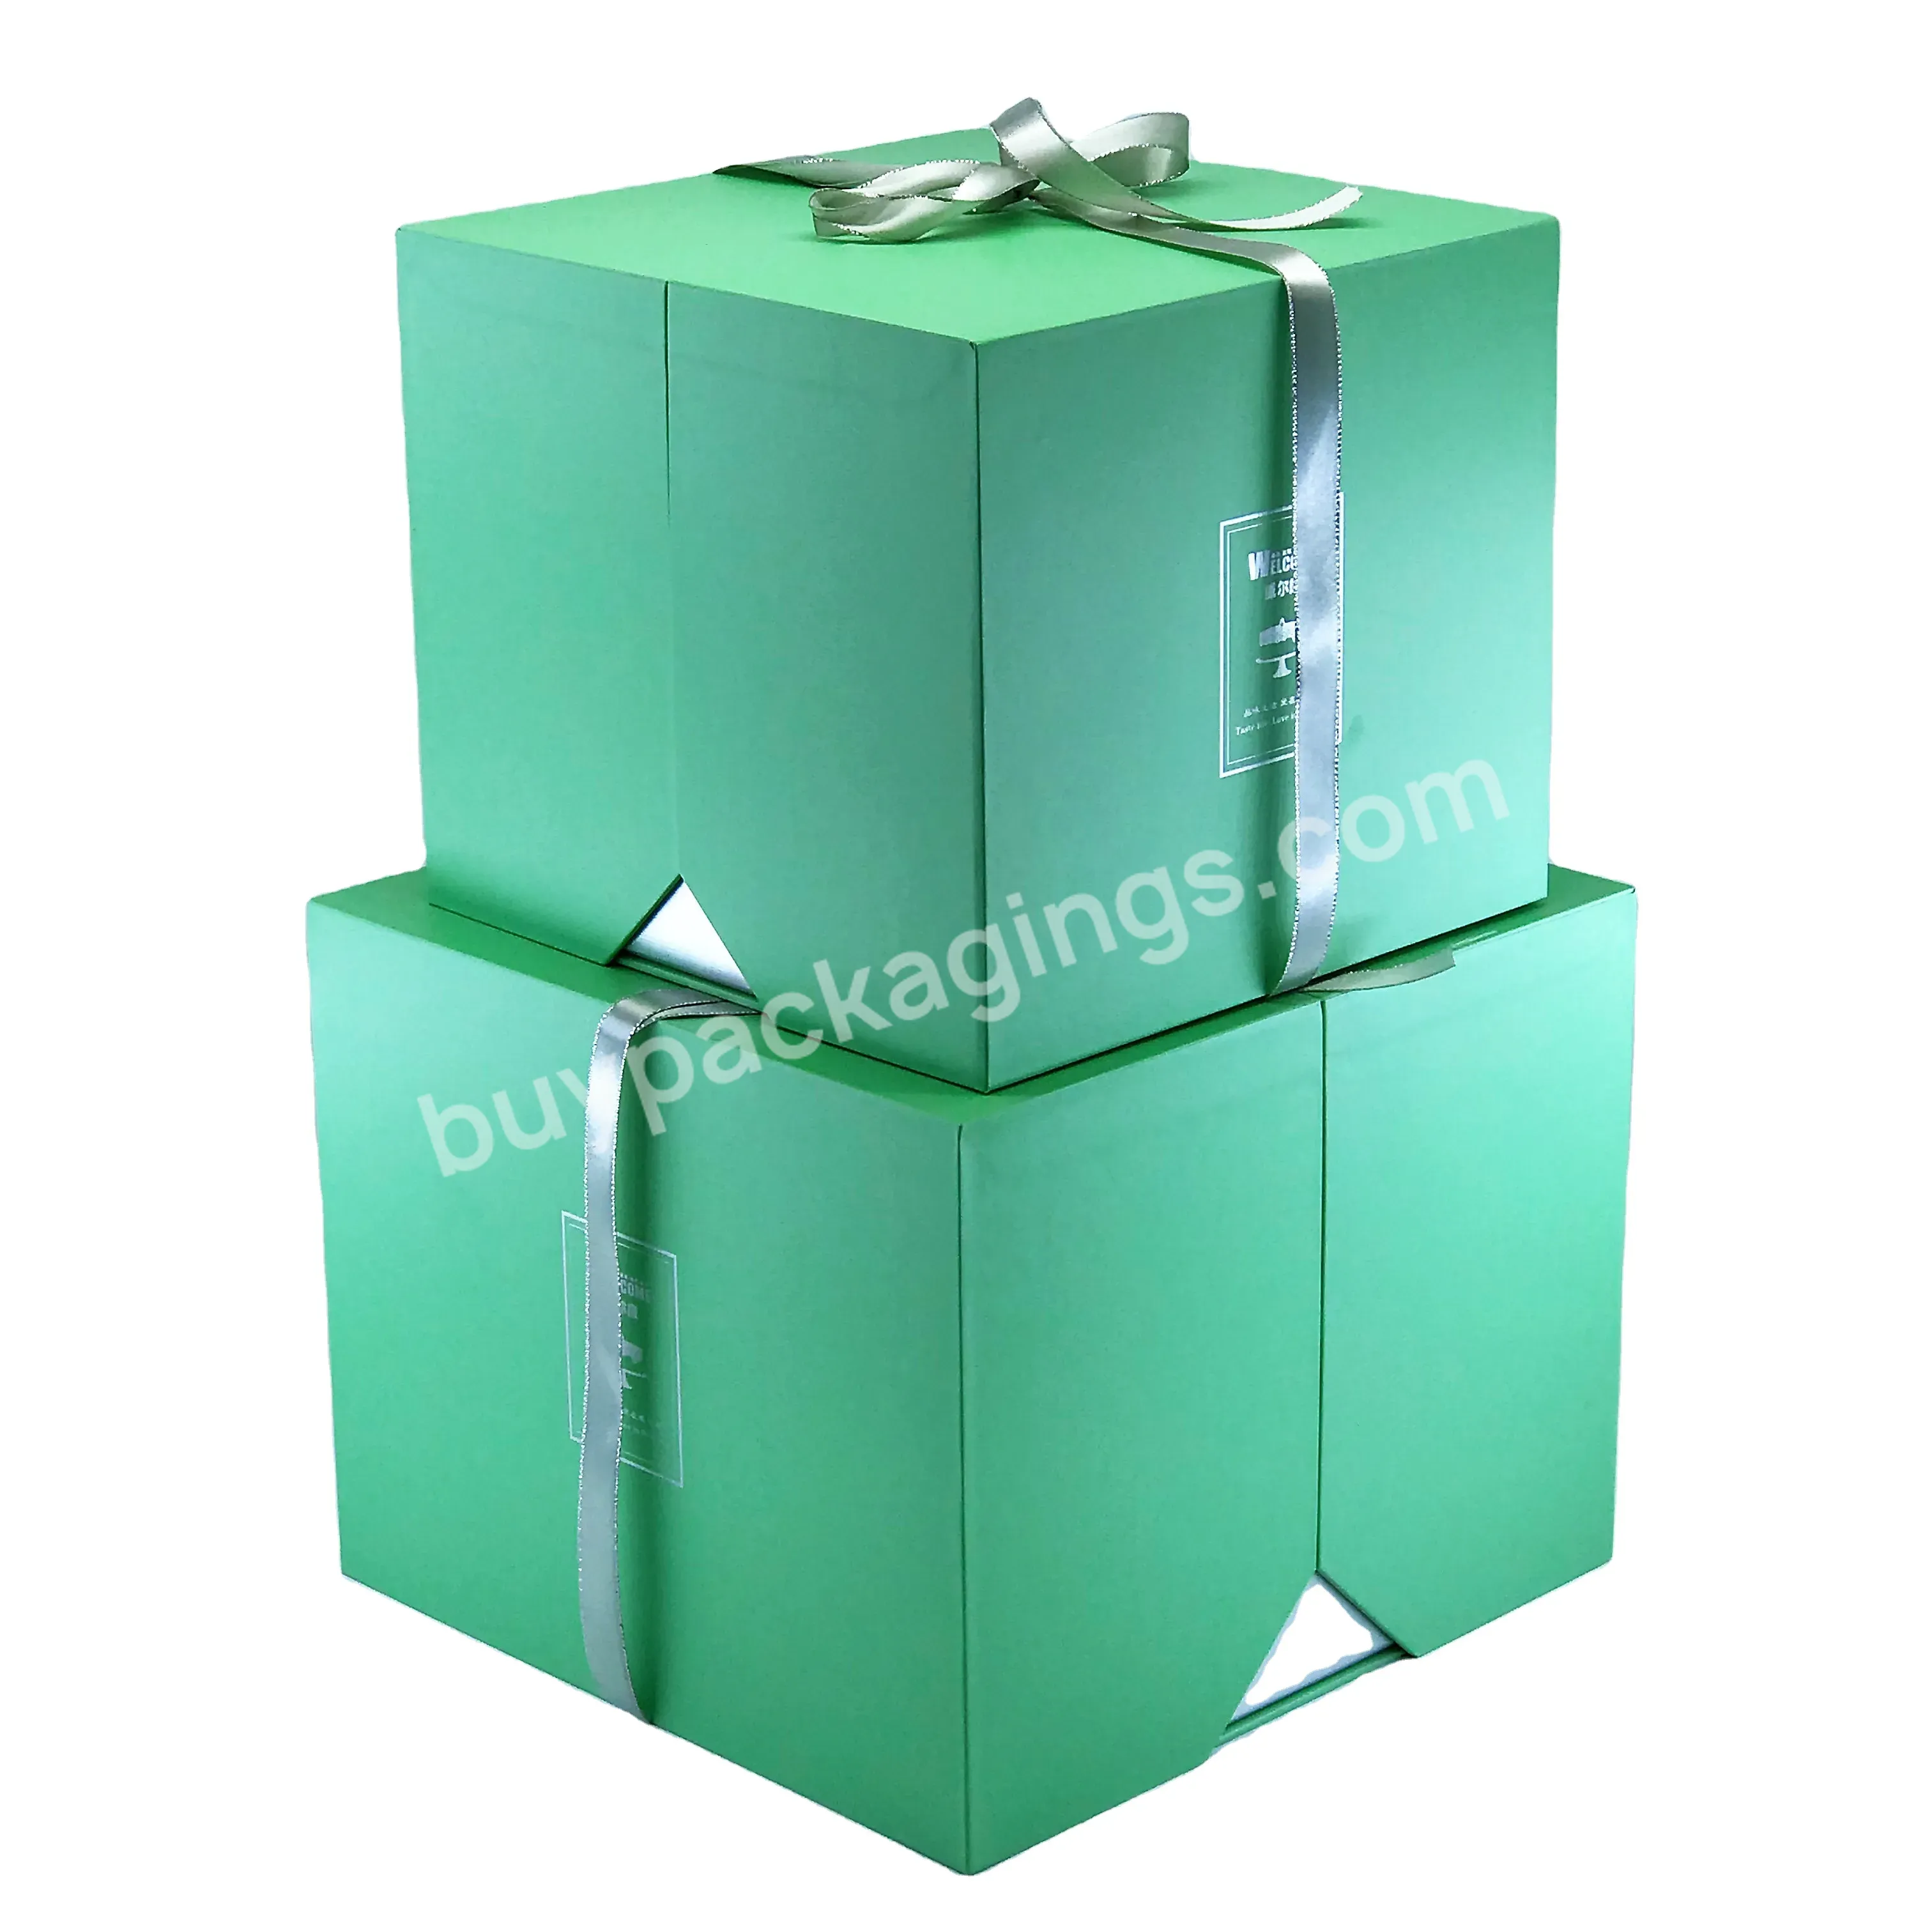 China Custom Logo Big Luxury Fashion Cardboard Boxes With Ribbon Handle Square Double Door For Sets Rose Flower Box Packaging - Buy Sets Rose Flower Box Packaging,Ribbon Handle Square Double Door,China Custom Logo Big Luxury Fashion Cardboard Boxes.